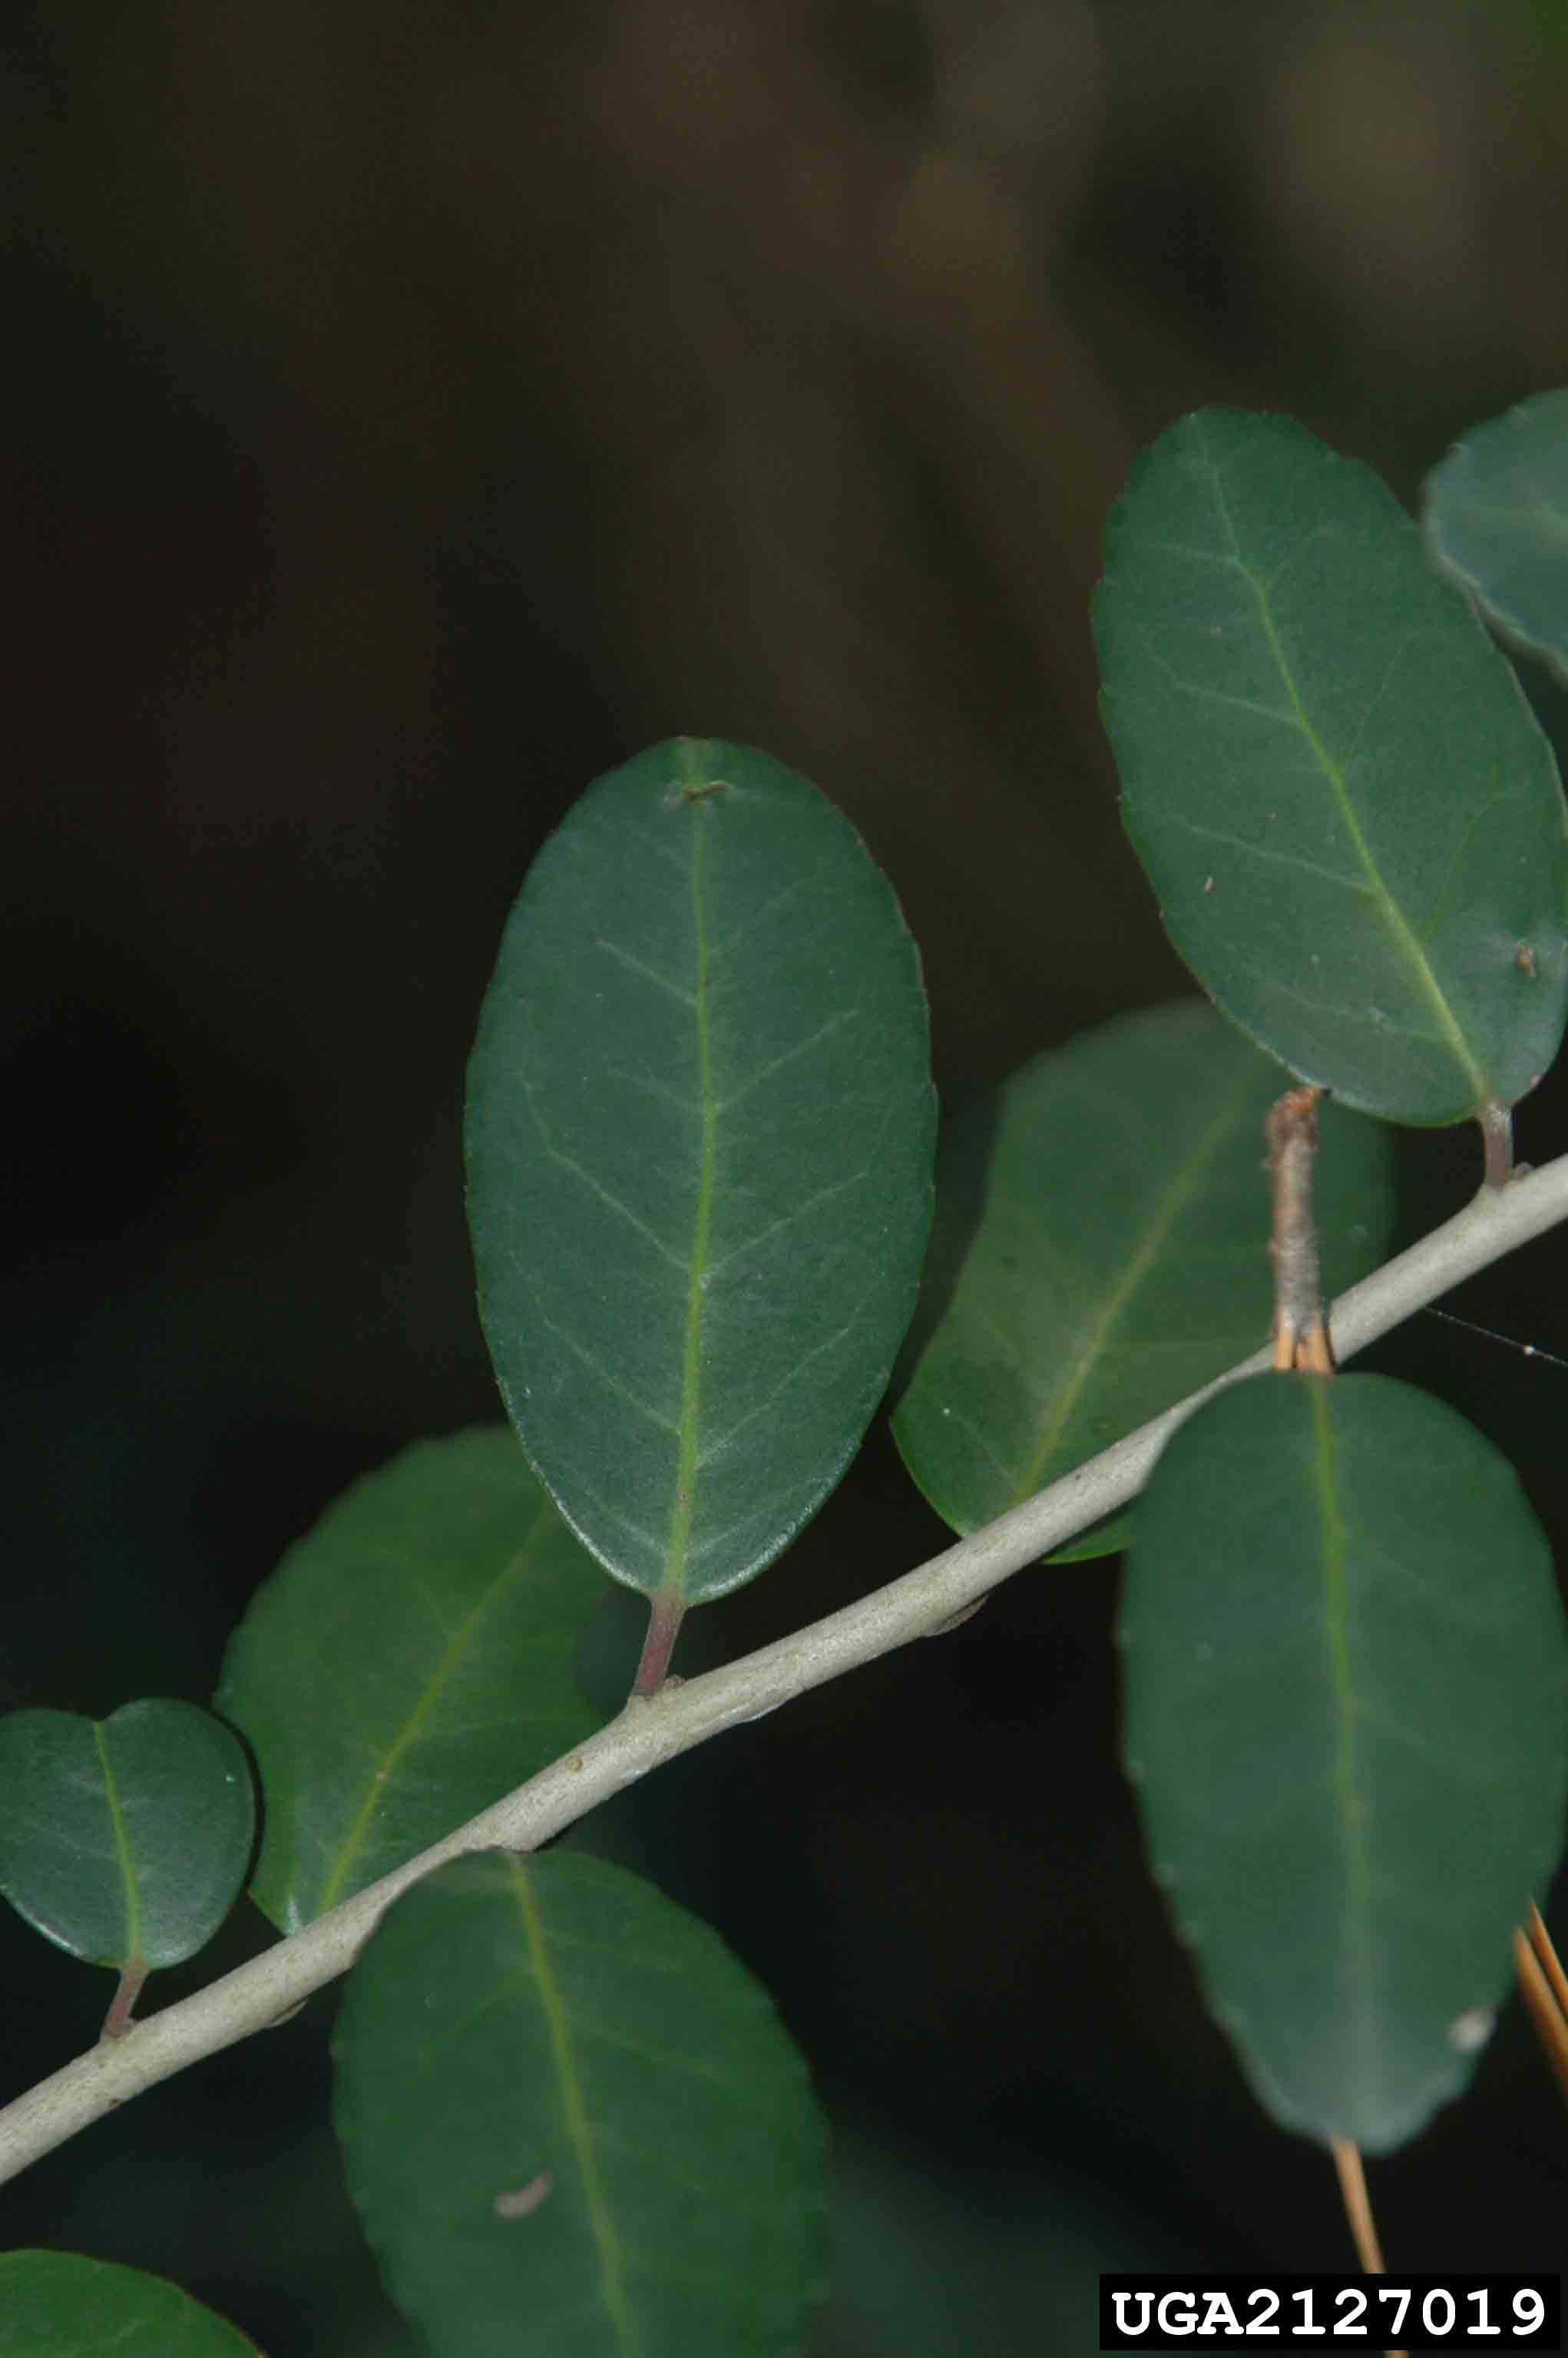 Yaupon holly leaves, showing round-toothed margins, alternate arrangement, and gray twig